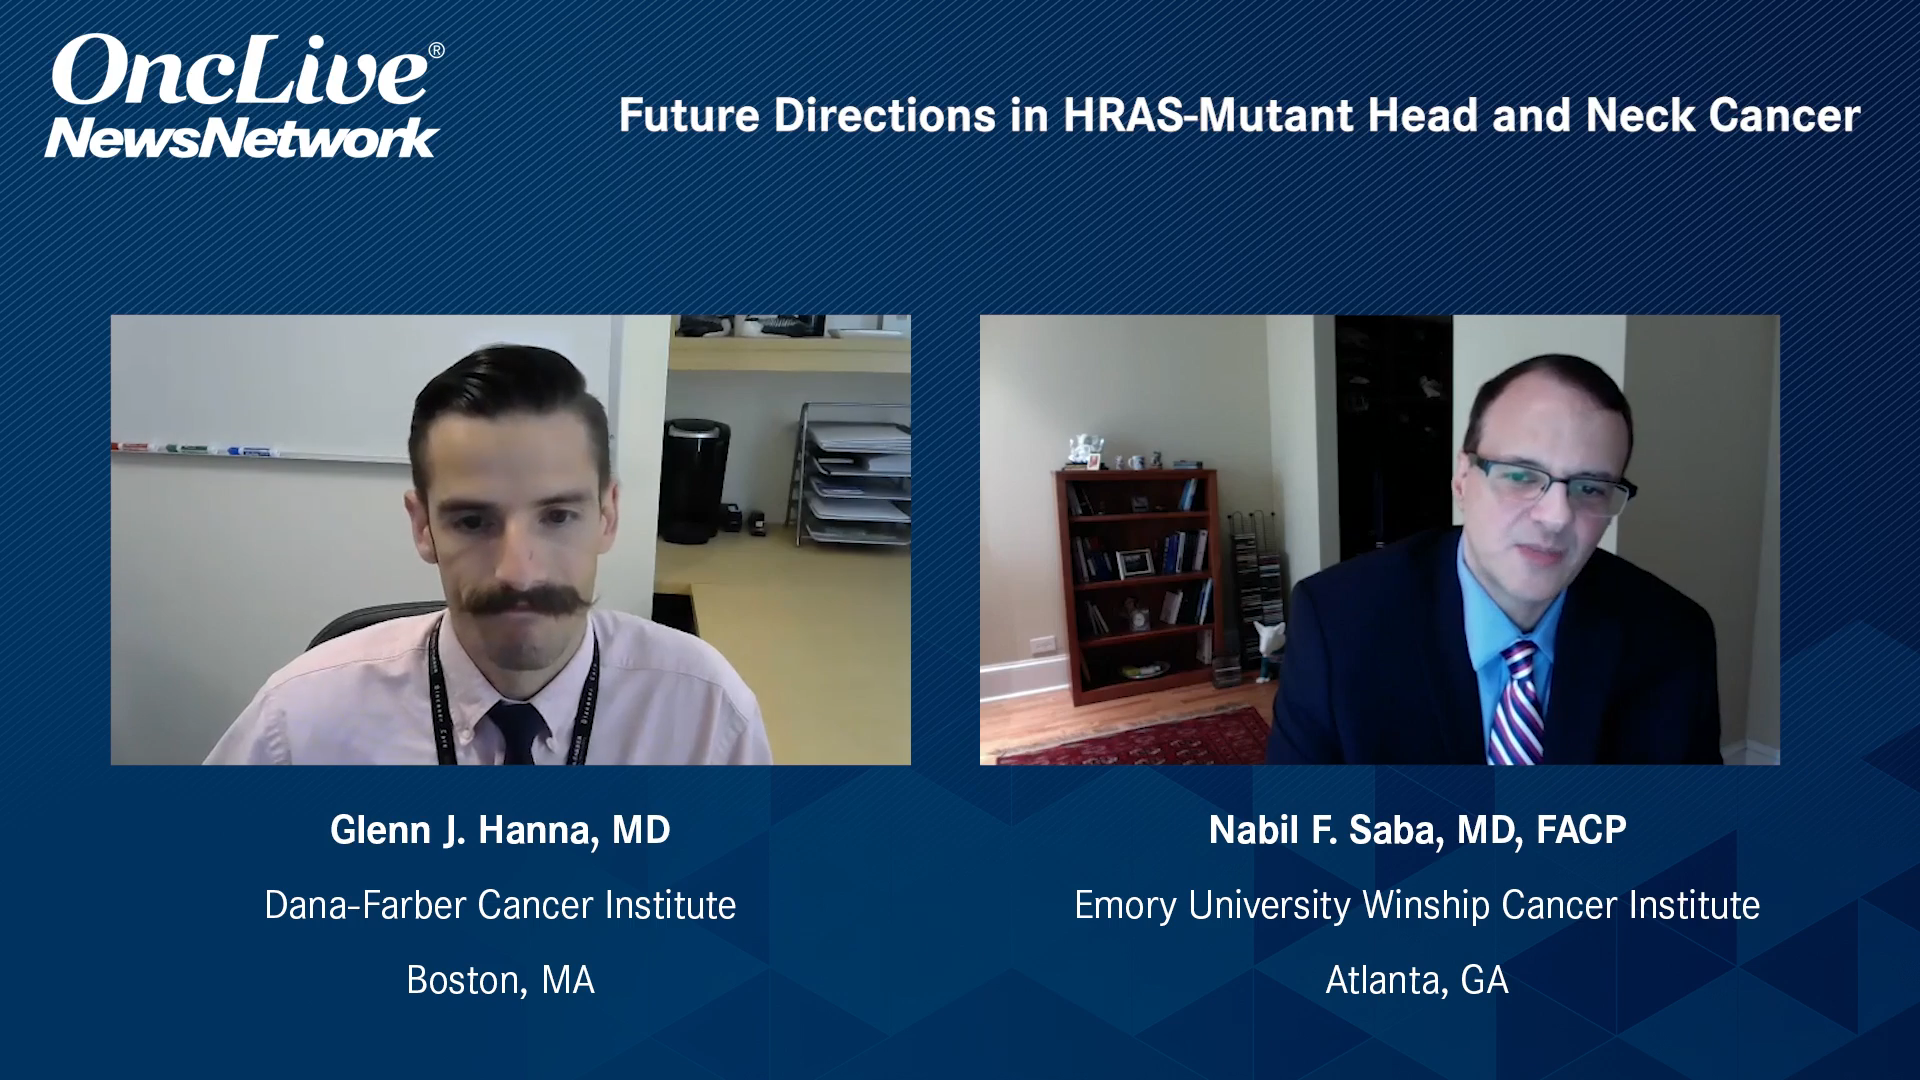 Future Directions in HRAS-Mutated Head and Neck Cancer